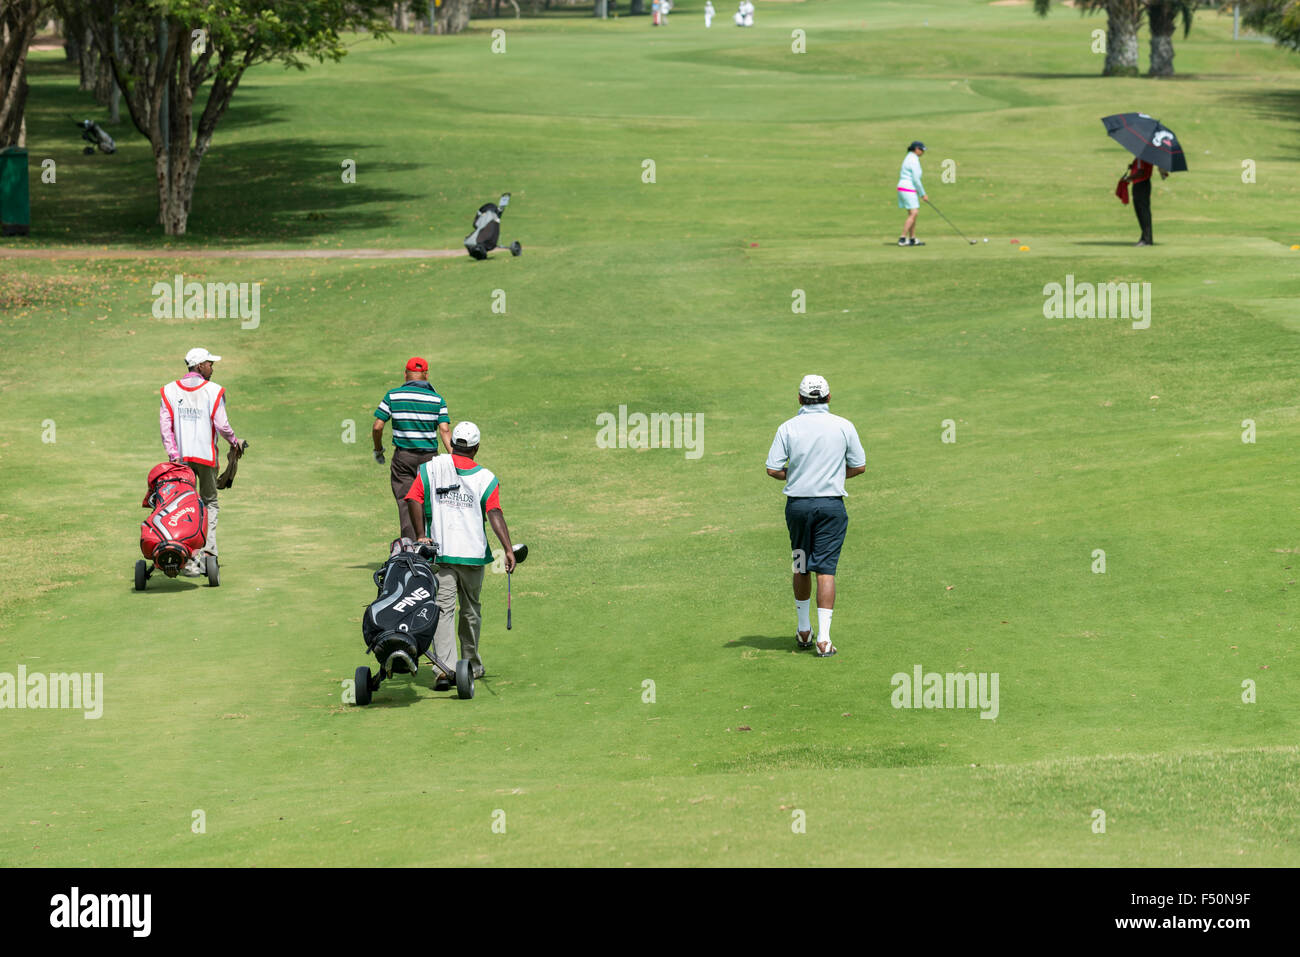 Members of the Karnataka Golf Association are playing at the golf course Stock Photo